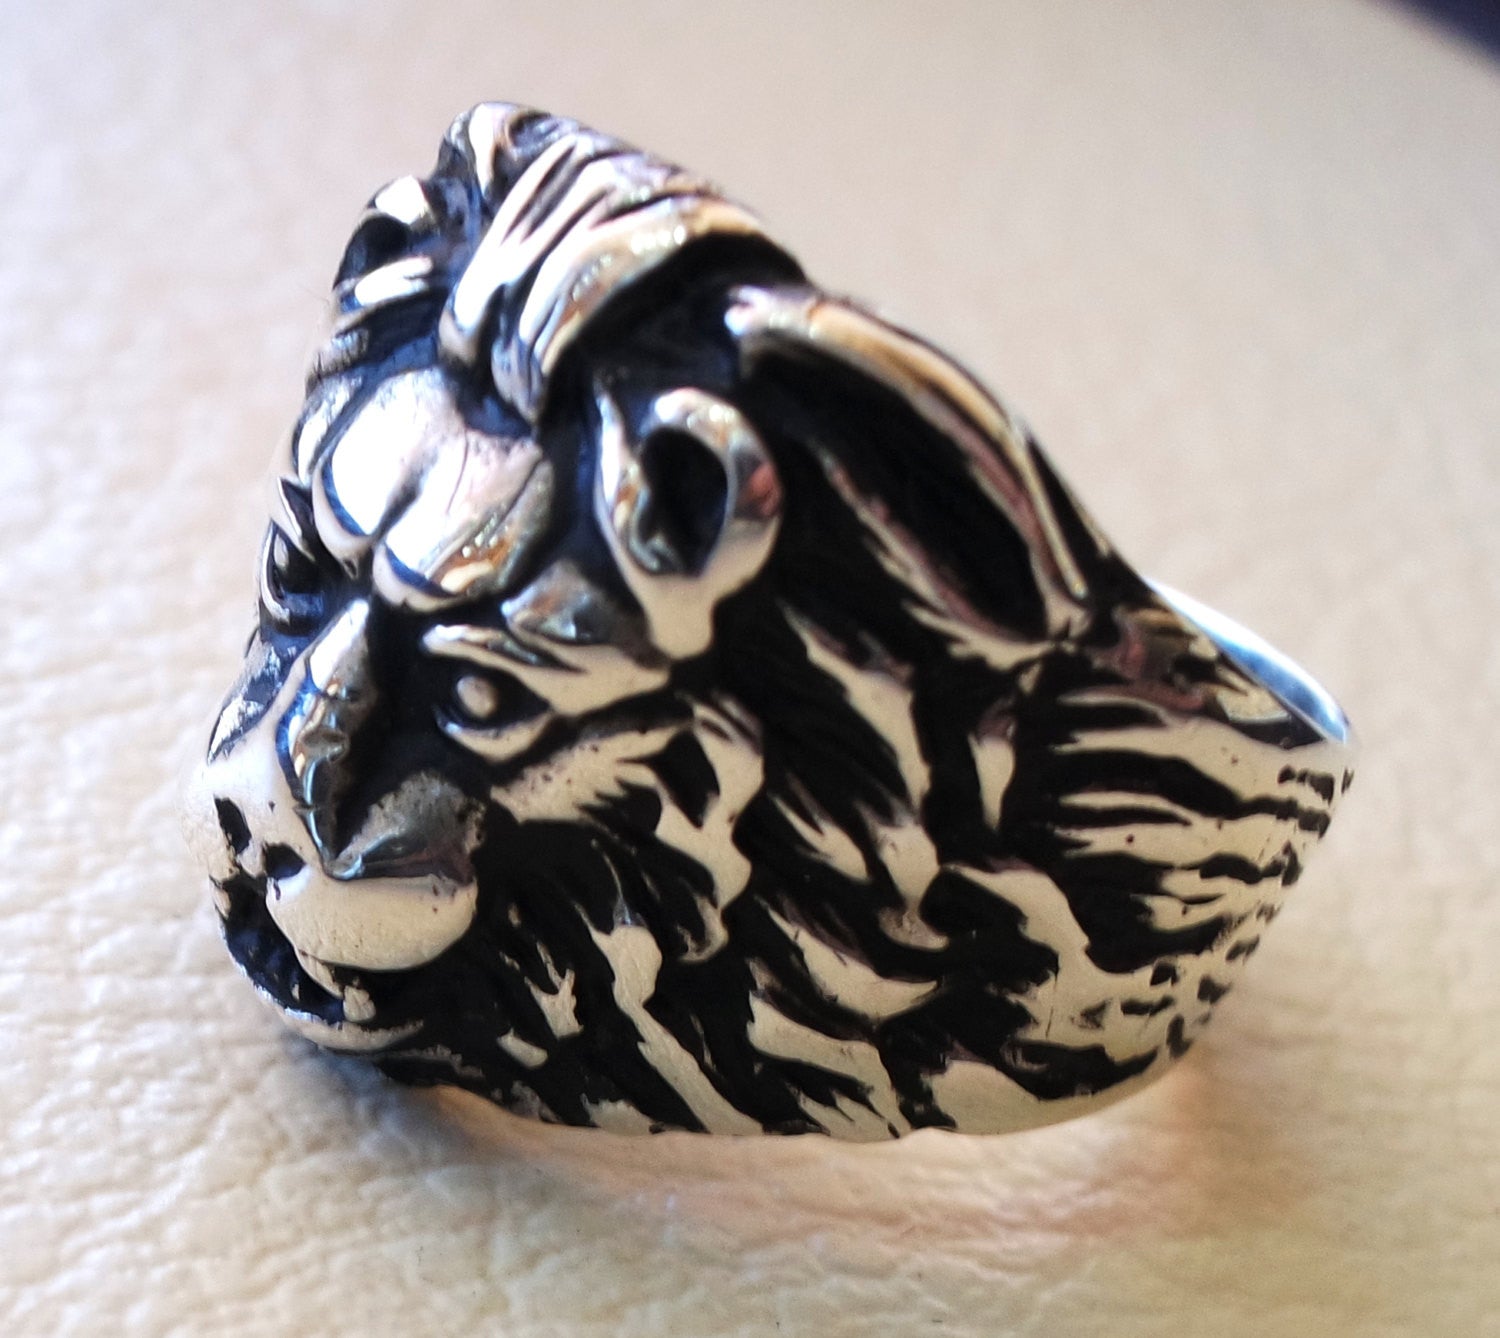 lion ring heavy sterling silver 925 man biker ring all sizes handmade animal head jewelry fast shipping detailed craftsmanship